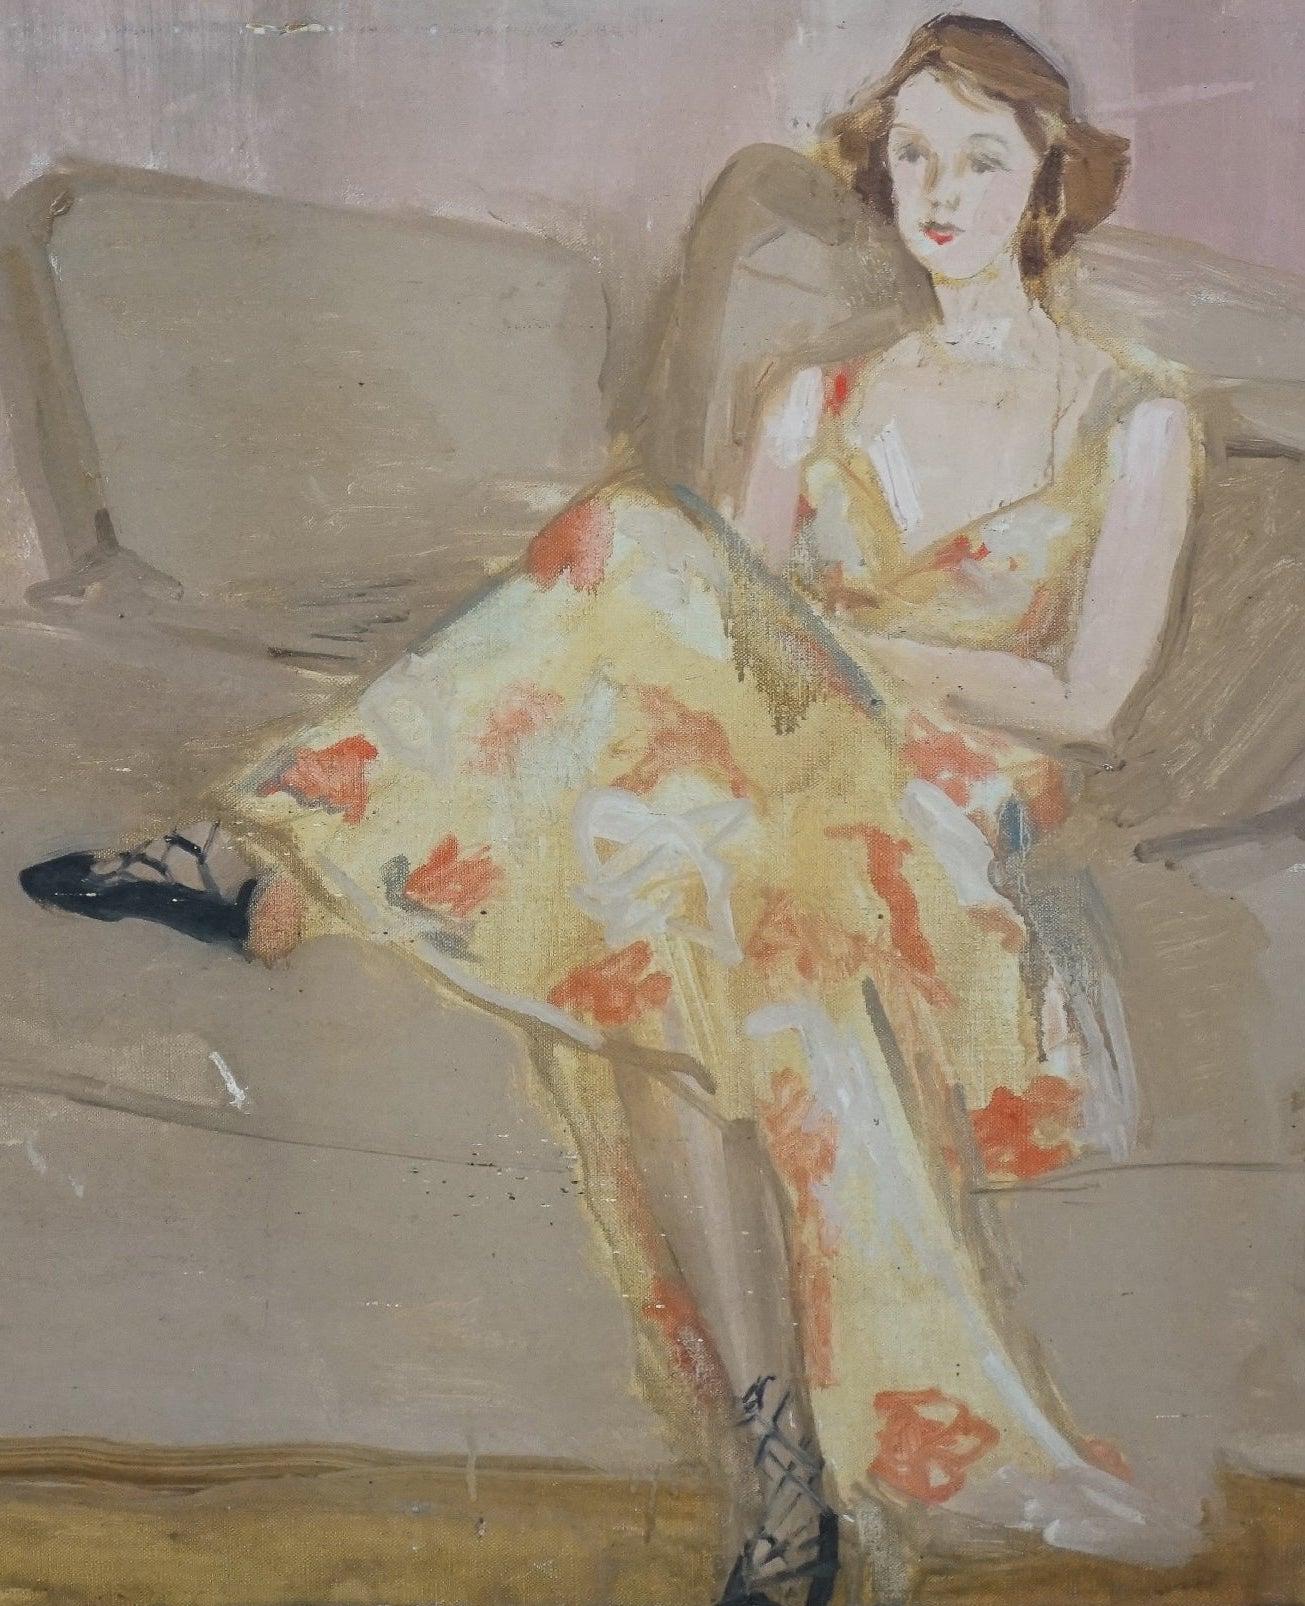 Art Deco Modernist Interior Brunette Girl Reclining on Sofa - Gray Interior Painting by Unknown